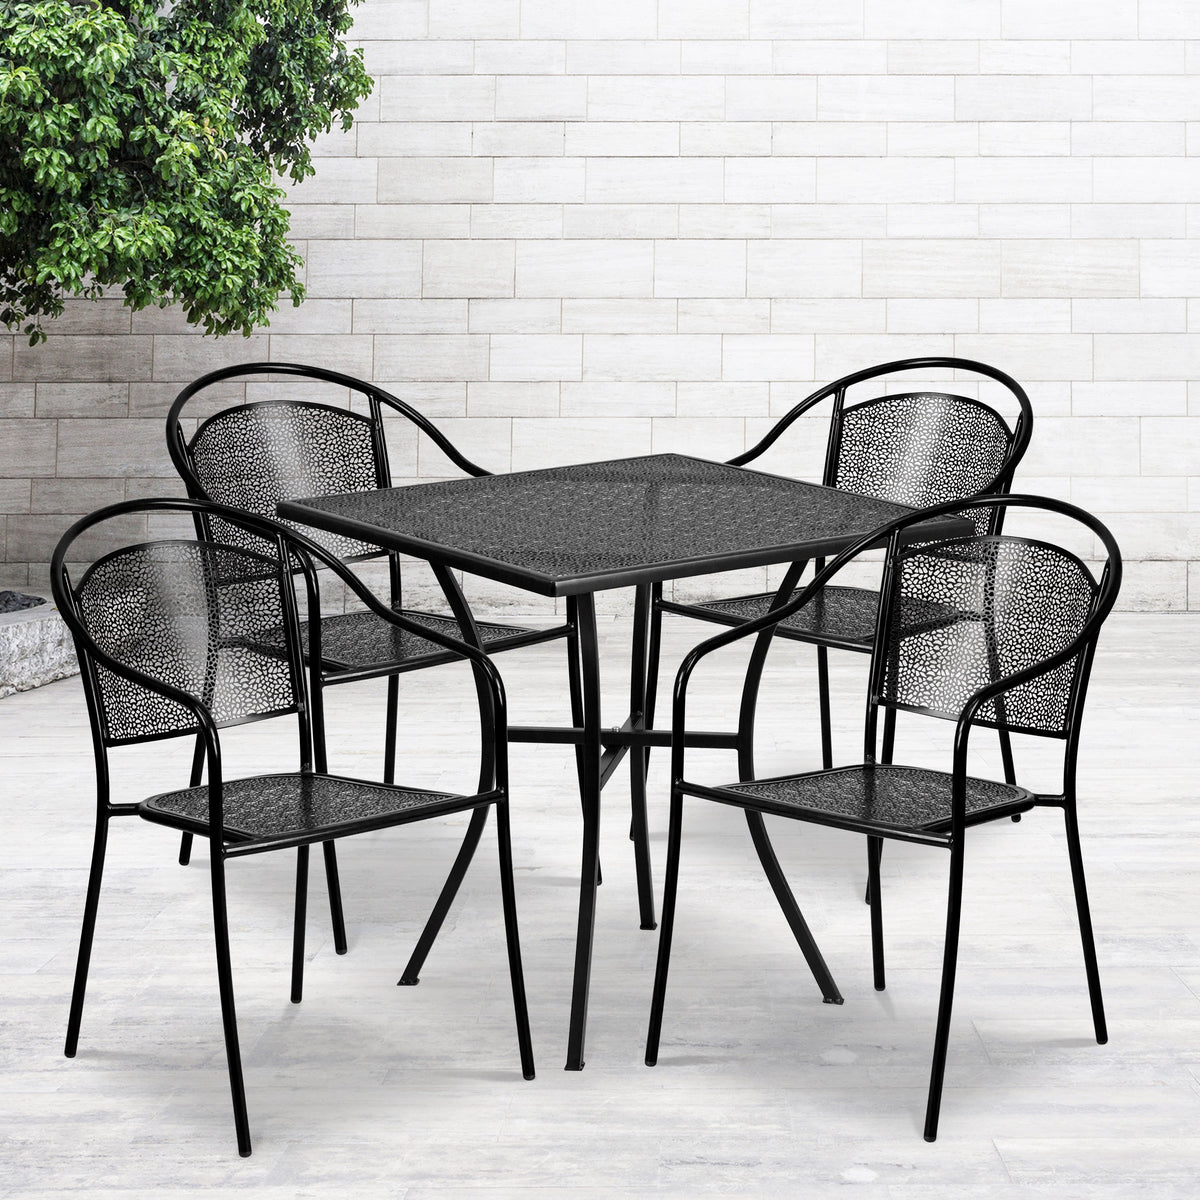 Black |#| 28inch Square Black Indoor-Outdoor Steel Patio Table Set with 4 Round Back Chairs